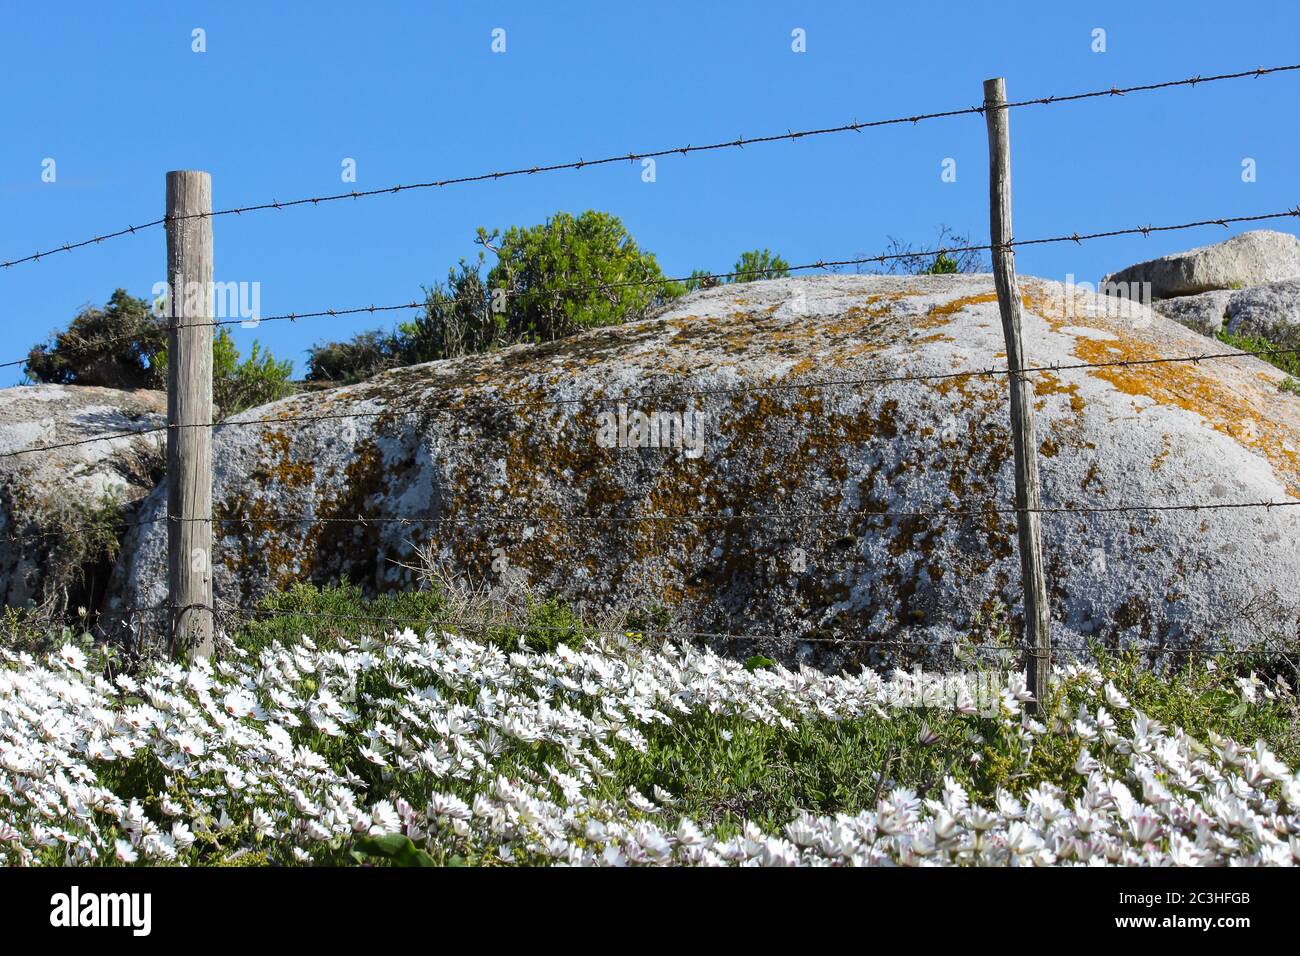 Cape Daisy Flowers And Fence (Dimorphotheca pluvialis) Stock Photo